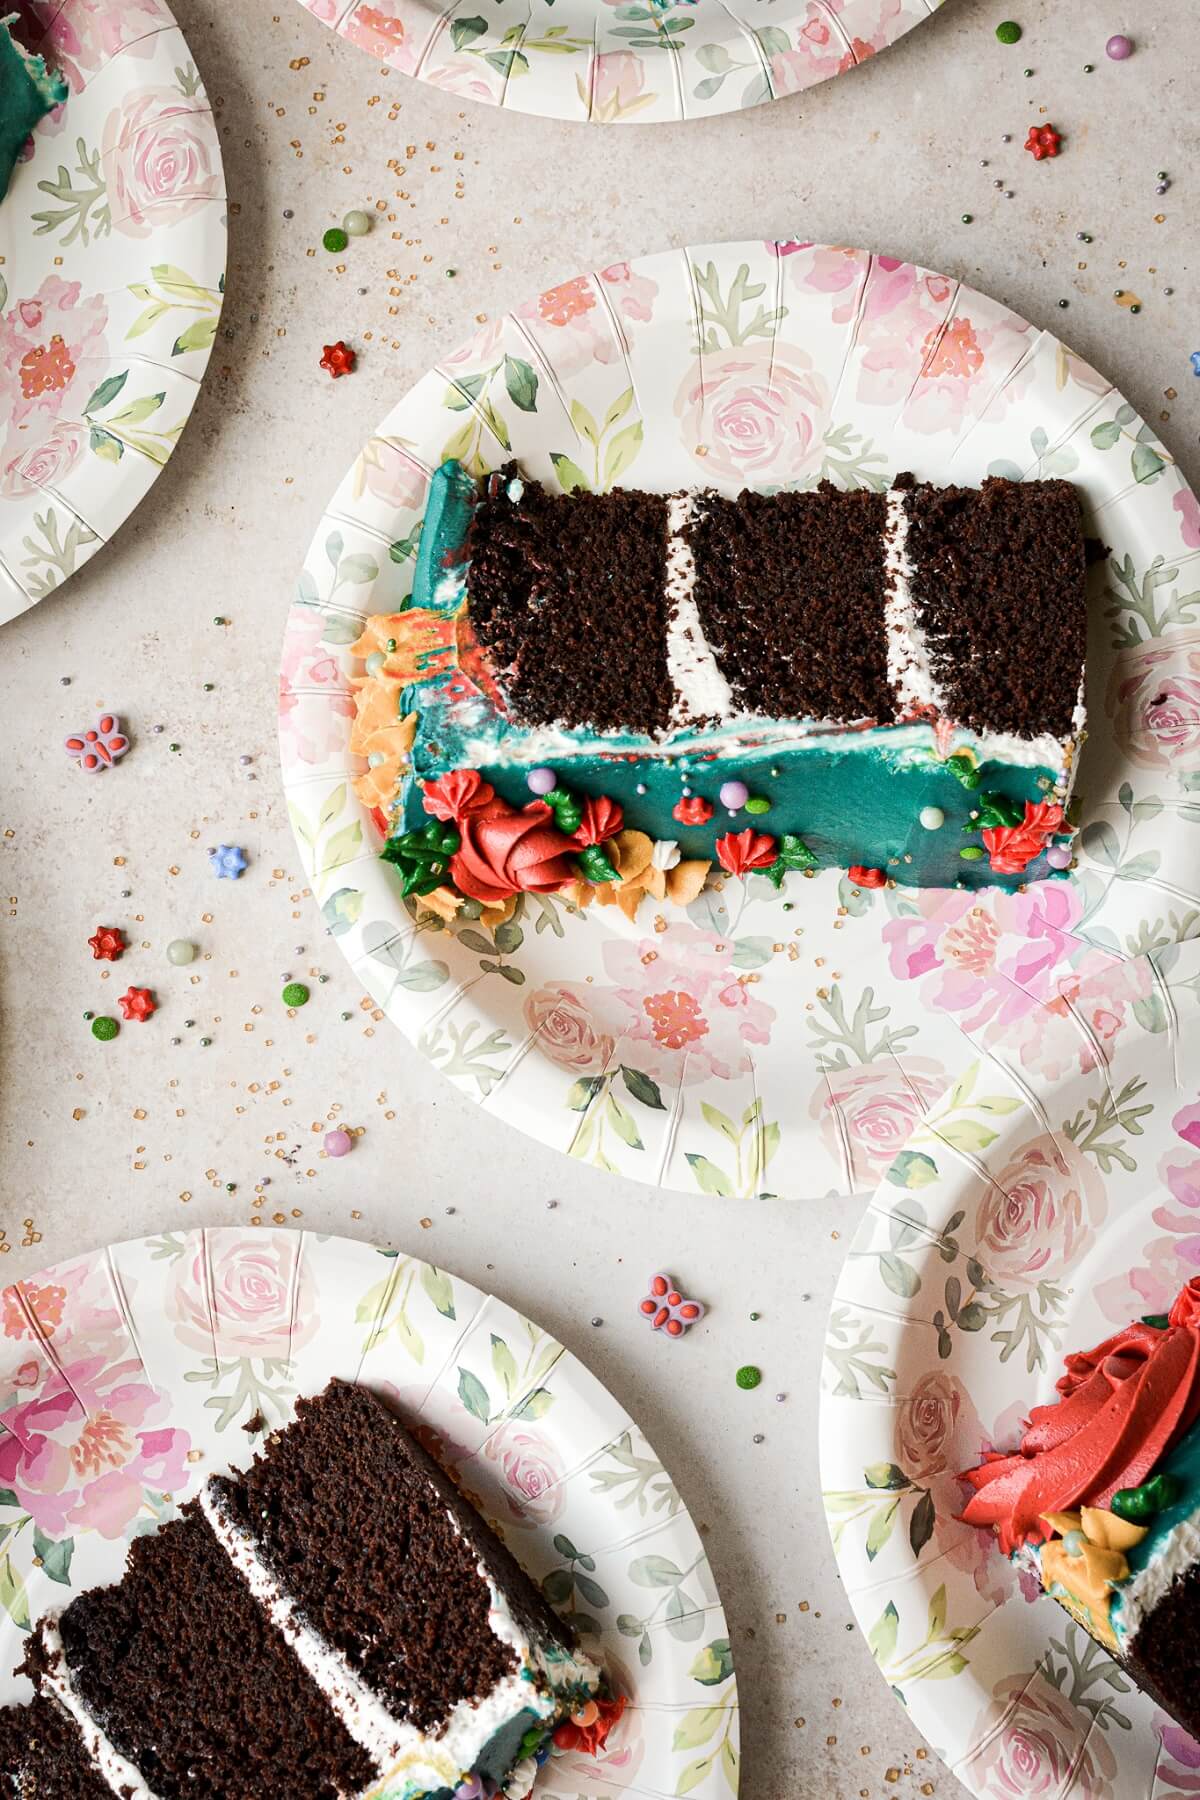 Slices of chocolate cake on floral paper plates.